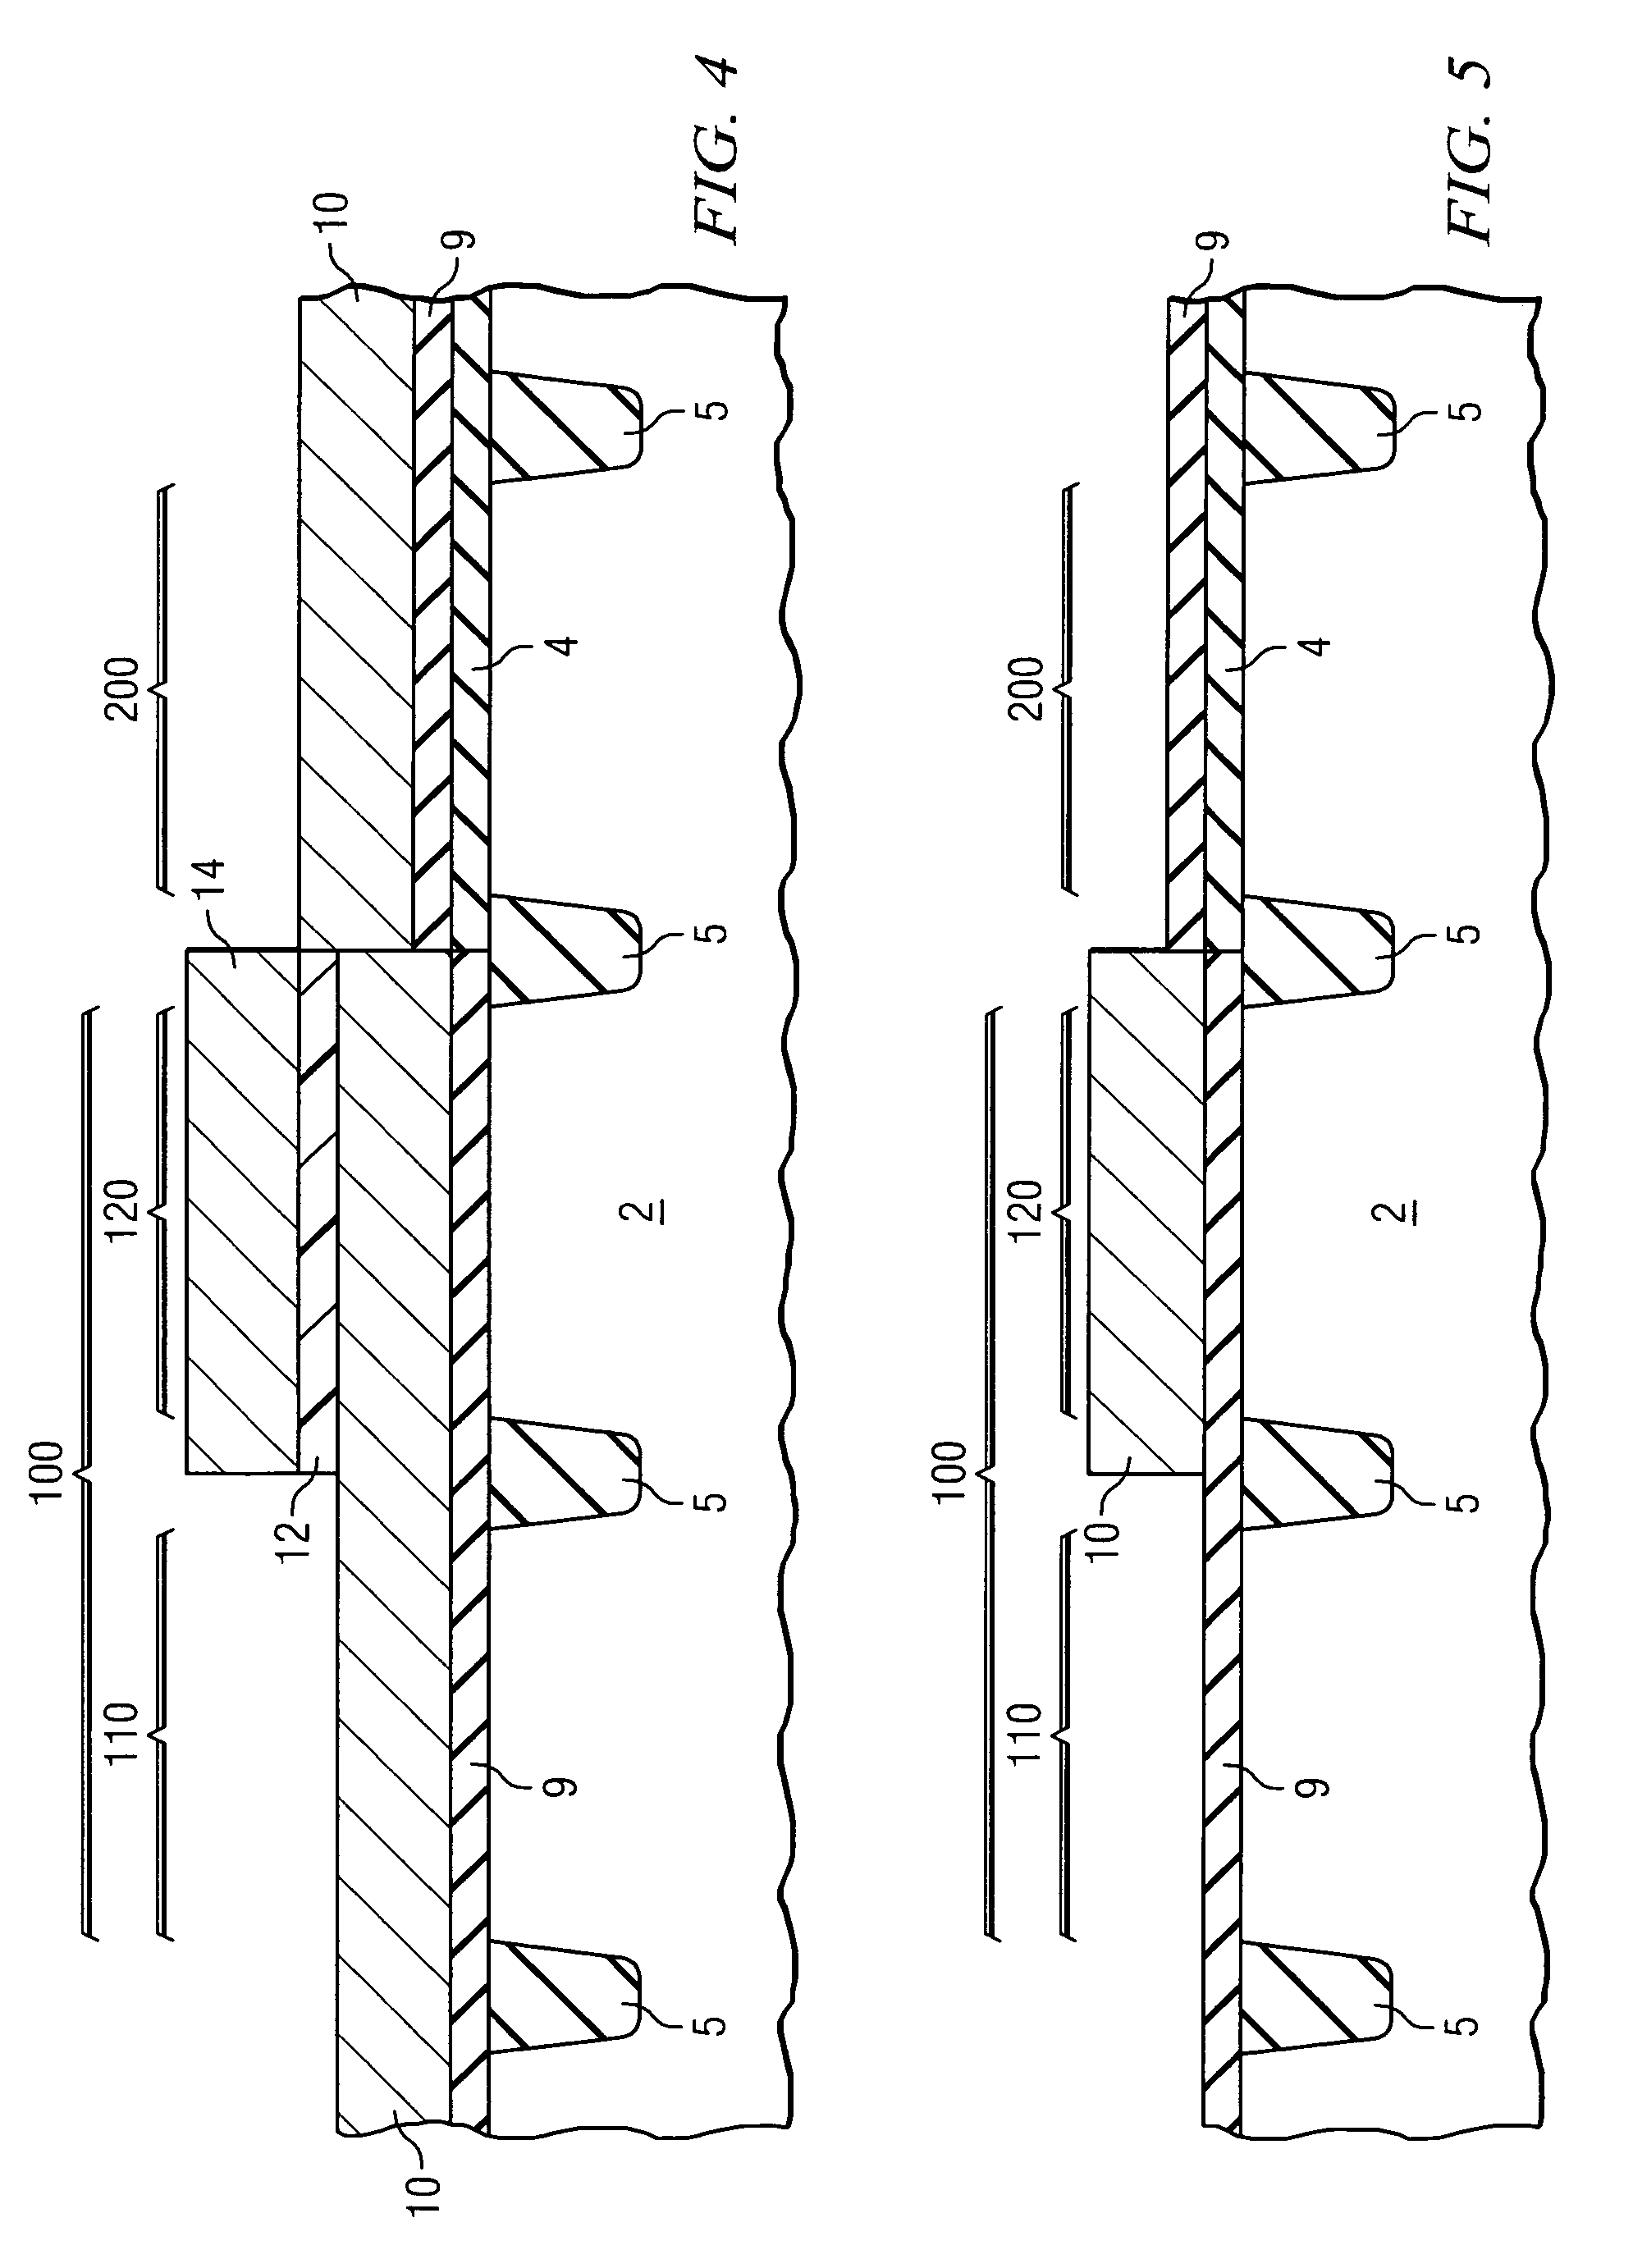 Composite gate structure in an integrated circuit